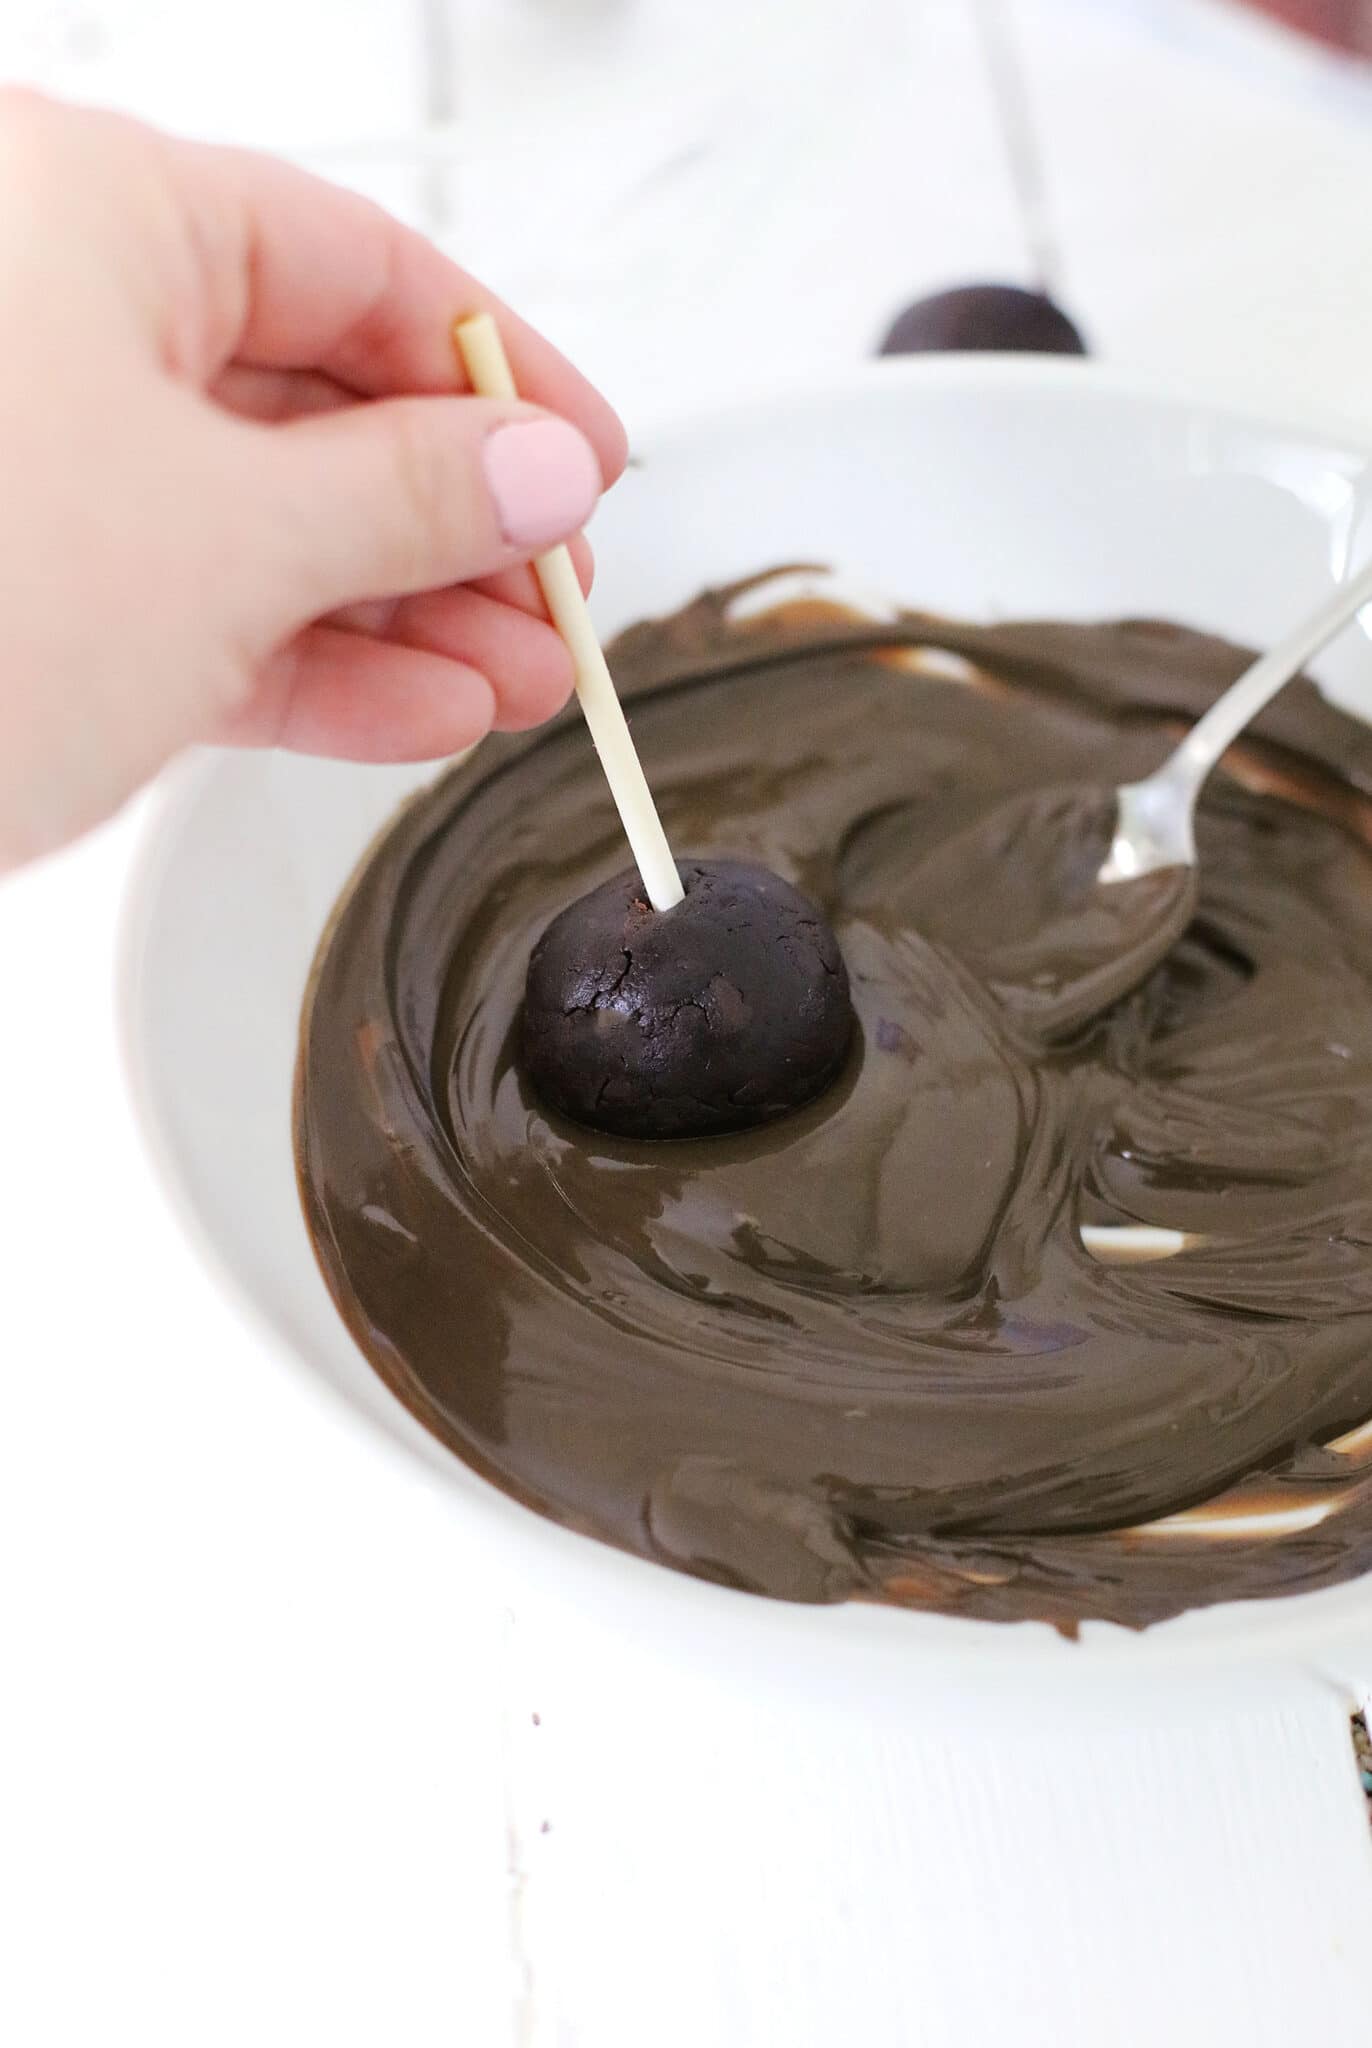 Dipping the cake into the chocolate.